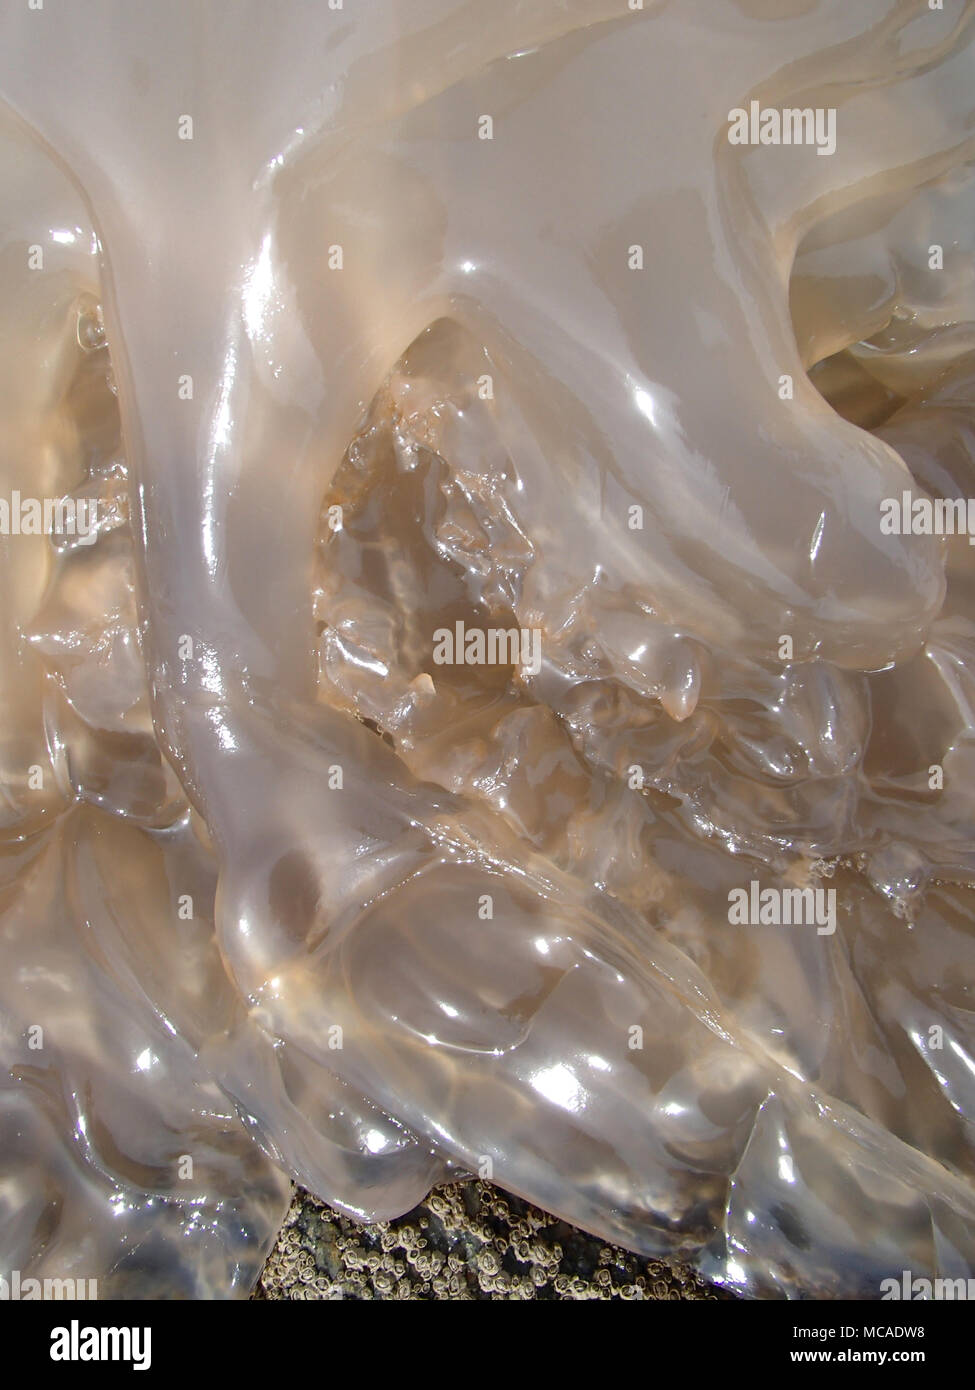 Stranded Jellyfish Close-Up Texture Stock Photo